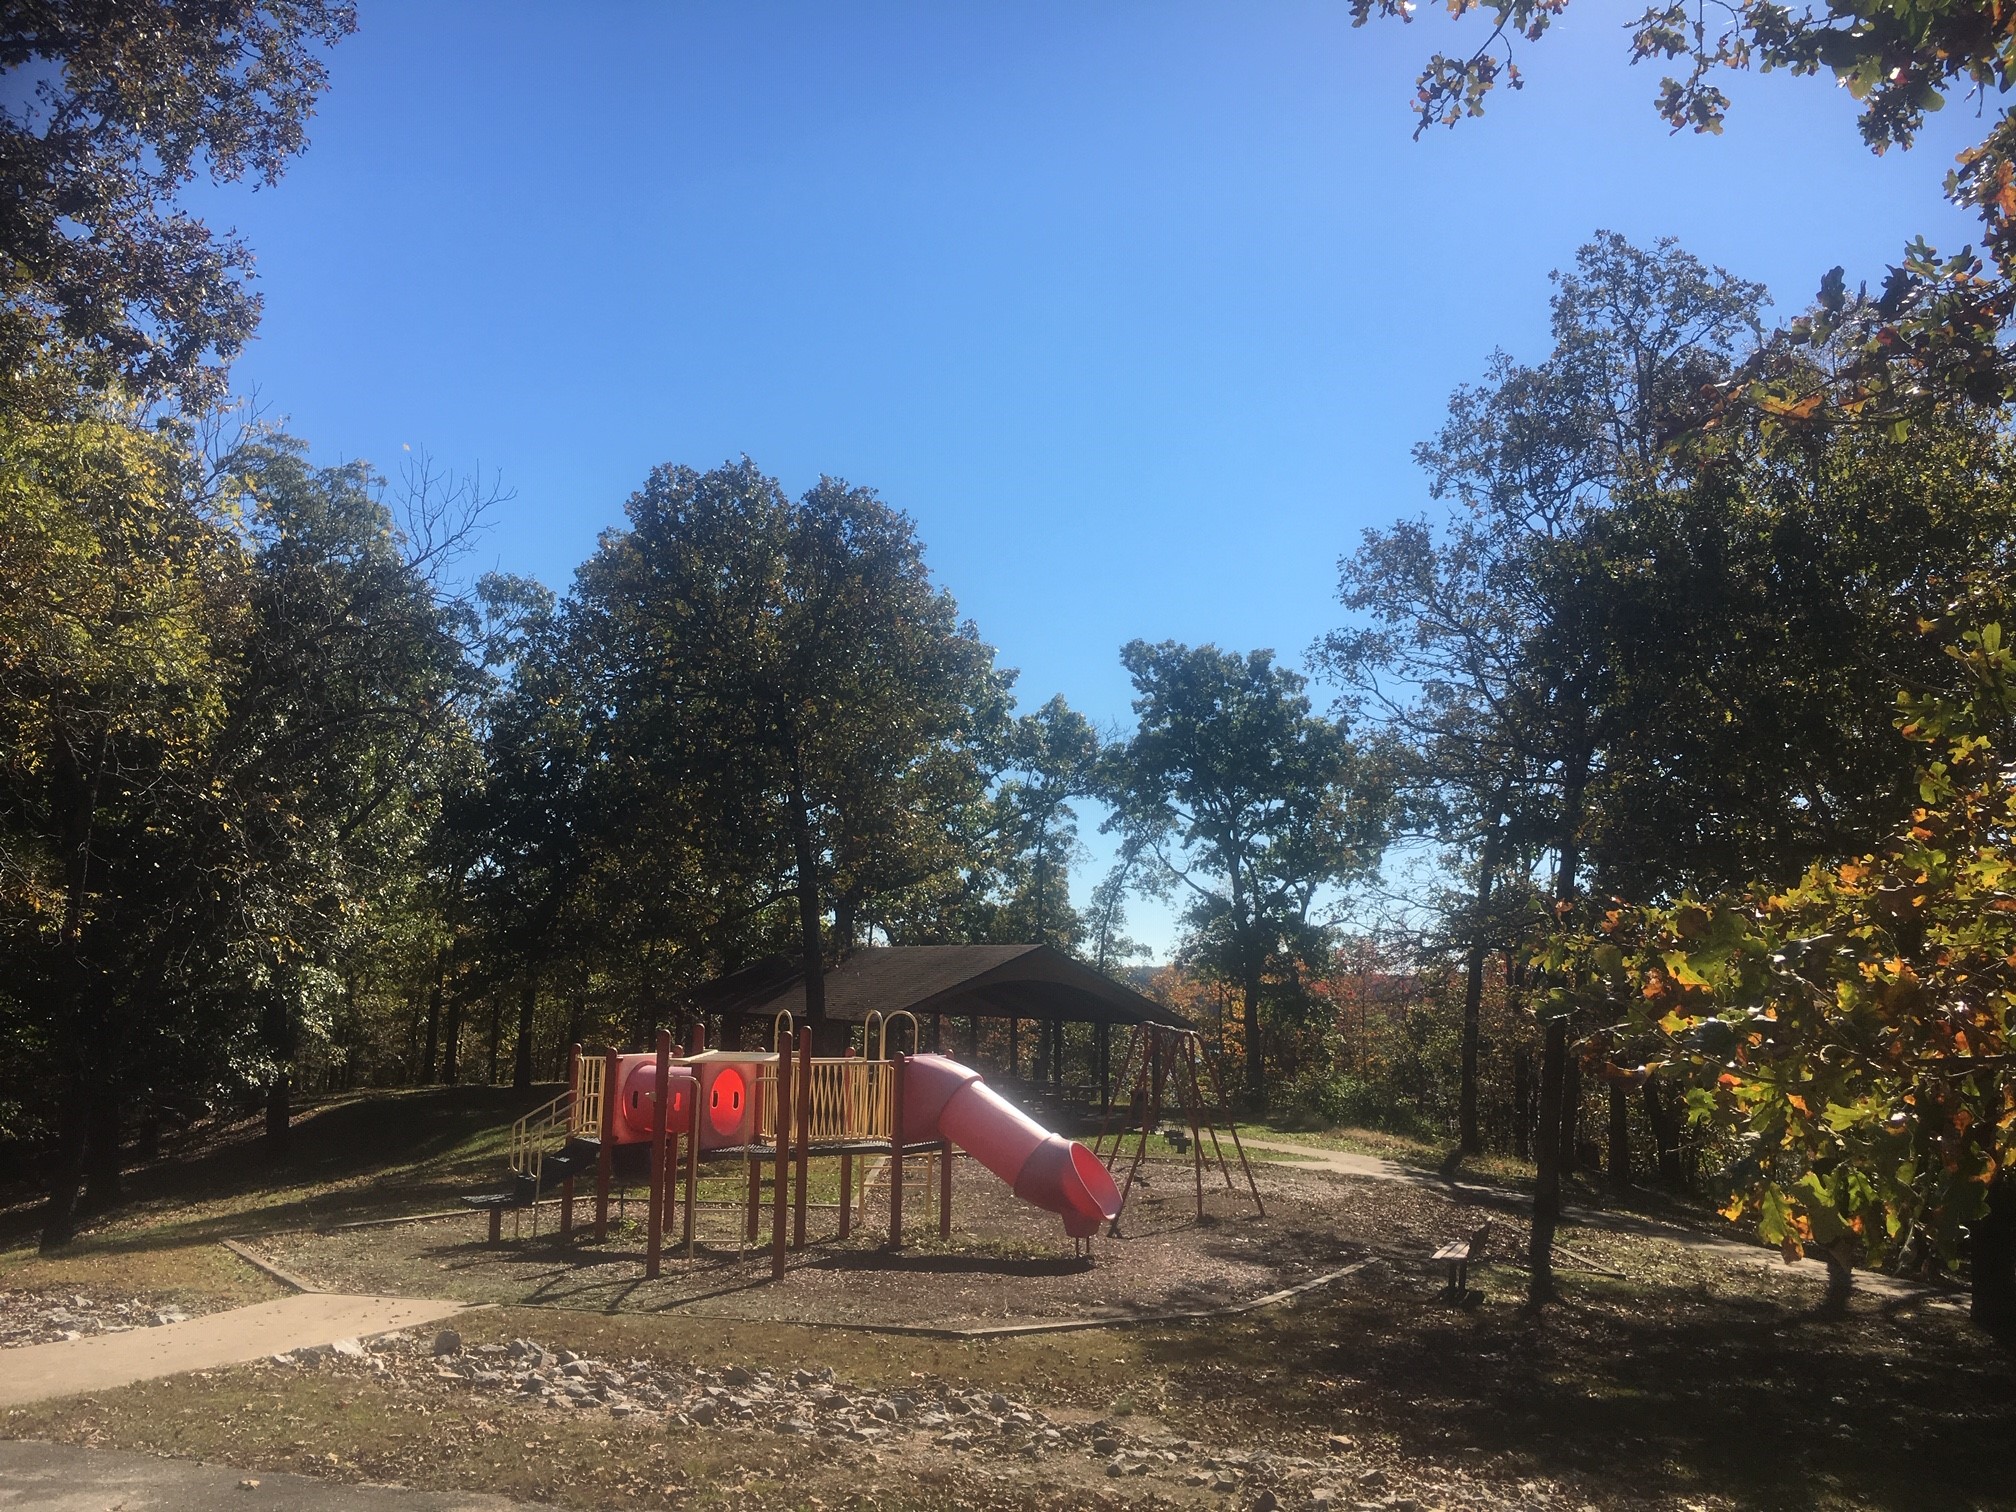 Playground in front of picnic shelter